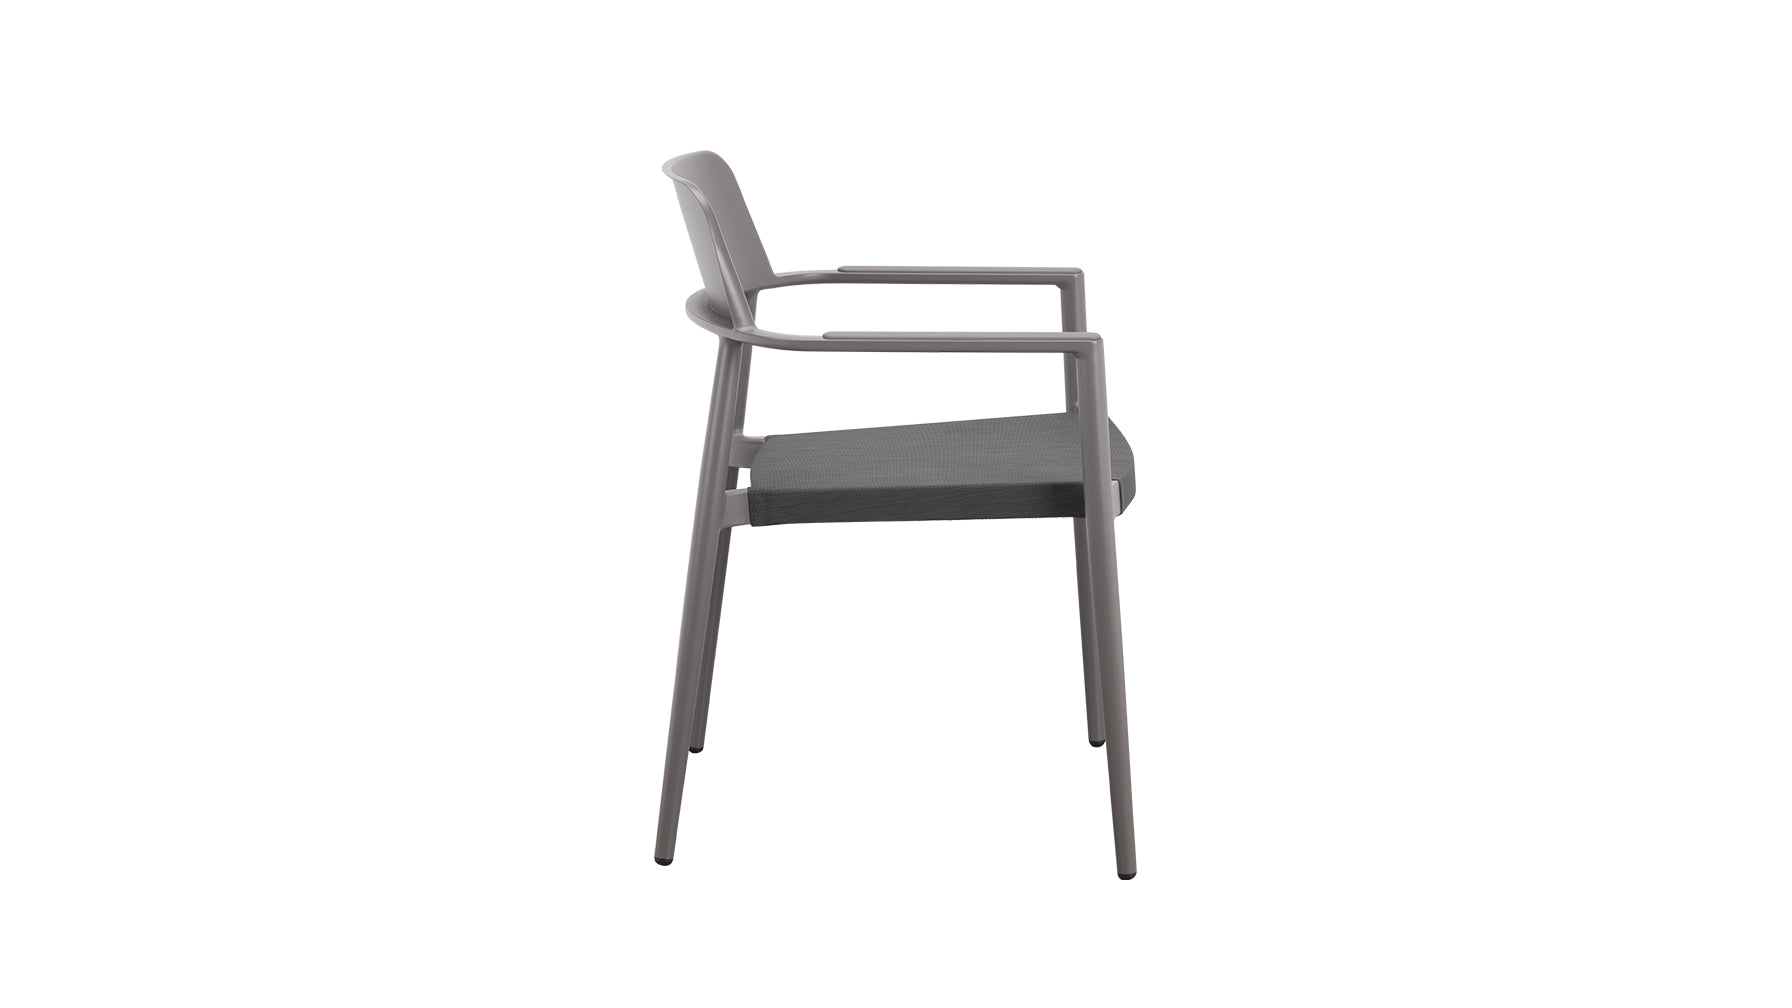 Best Of Me Outdoor Dining Chair (Set of Two), Pewter - Image 6